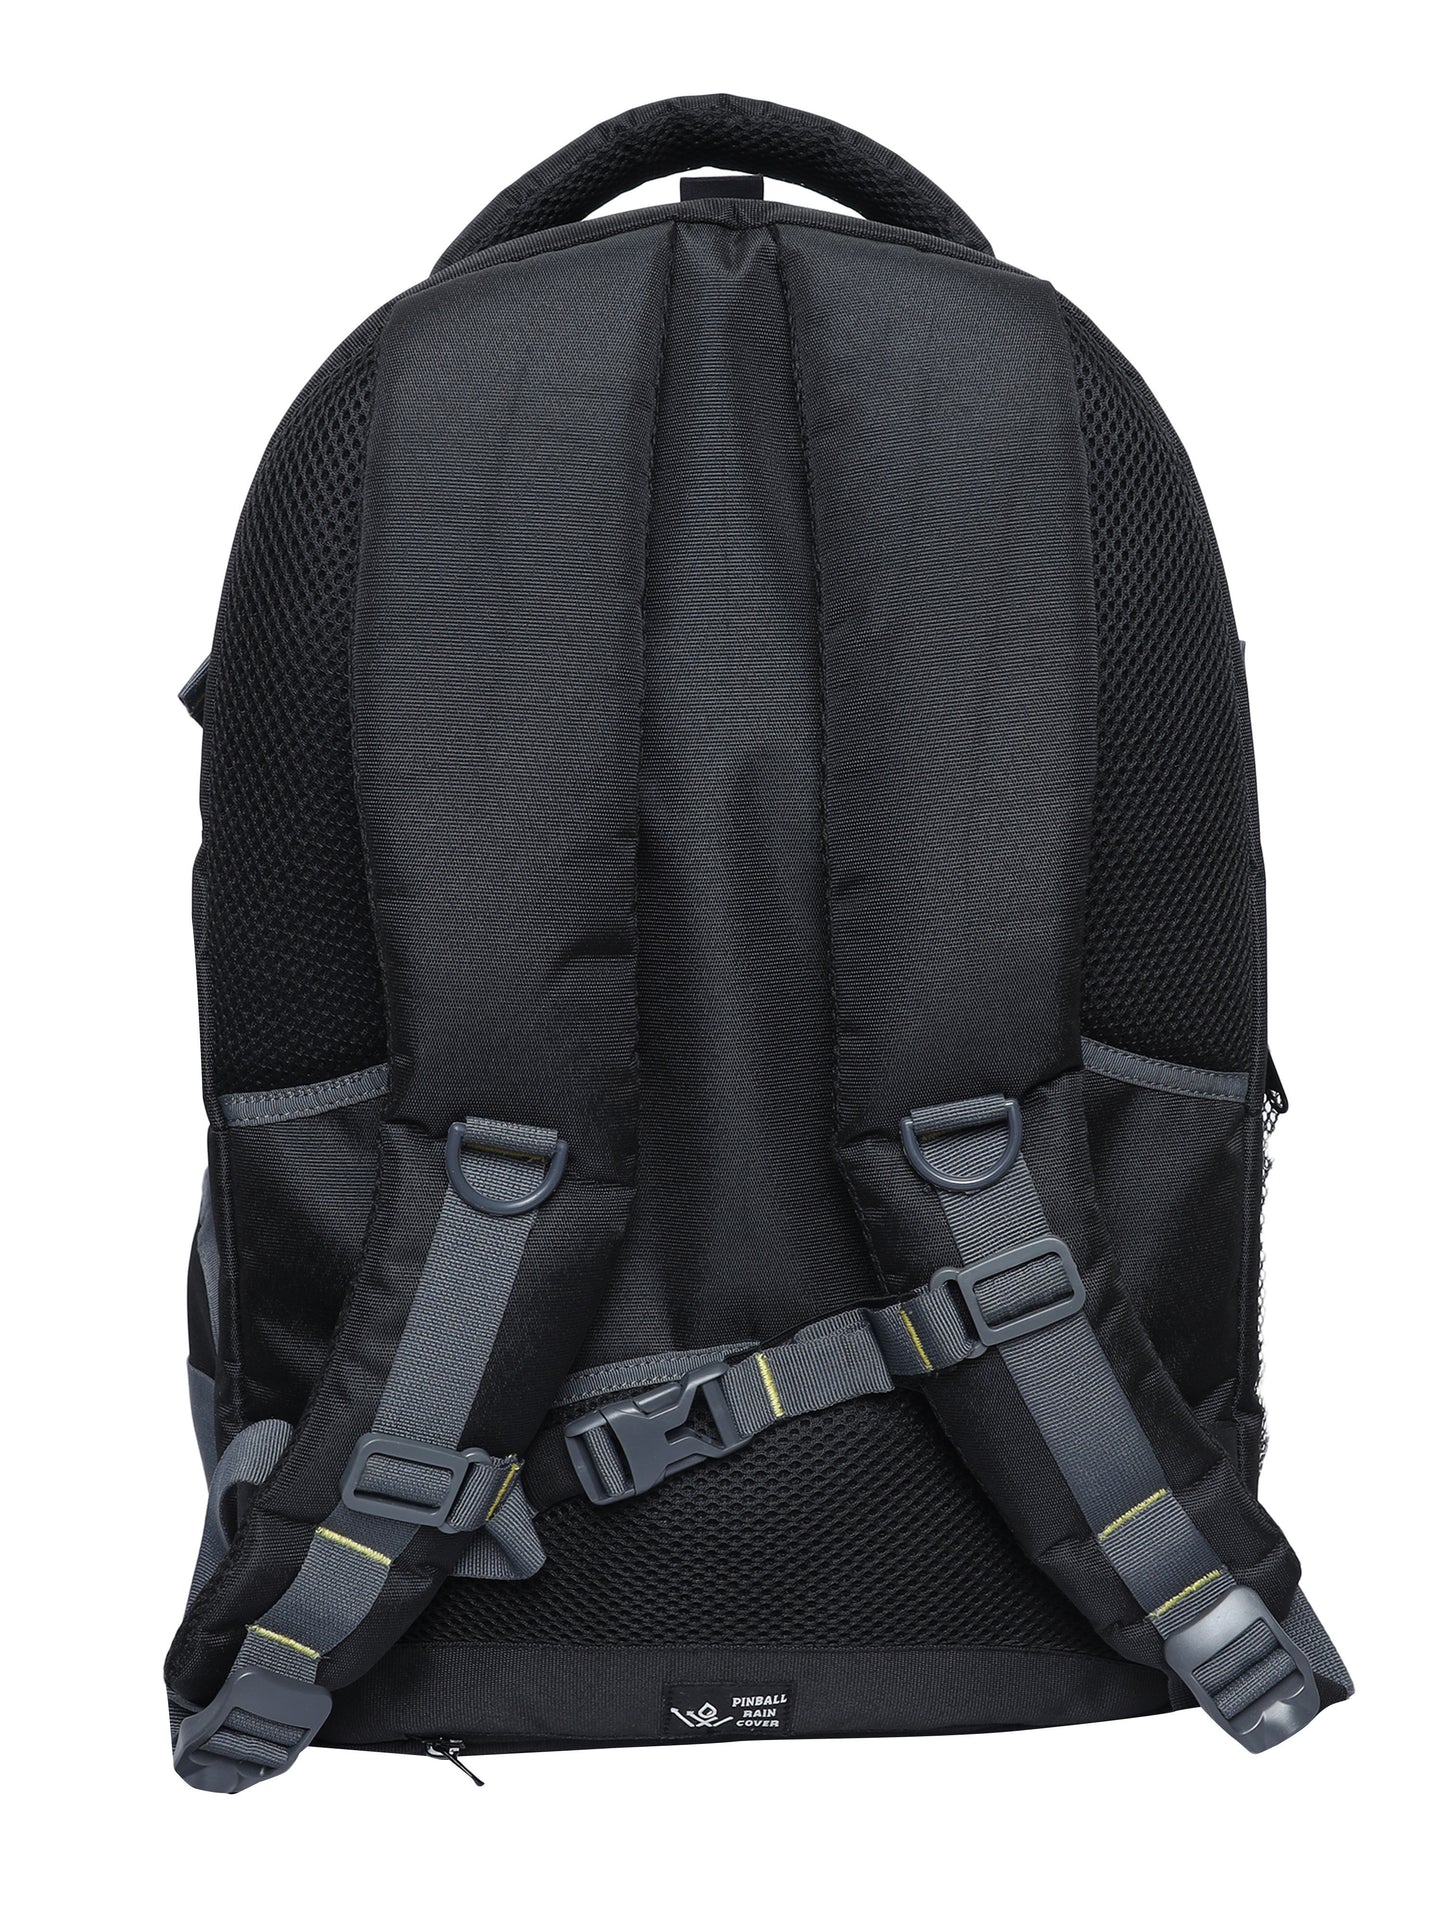 Image: Back view of the G13 BPL 4 DSLR camera bag, featuring padded shoulder straps and a breathable mesh back panel for enhanced comfort during extended photography sessions. The ergonomic design and adjustable features ensure a personalized fit, reducing strain and fatigue. The bag's robust construction and waterproof materials provide reliable protection for your valuable camera gear.